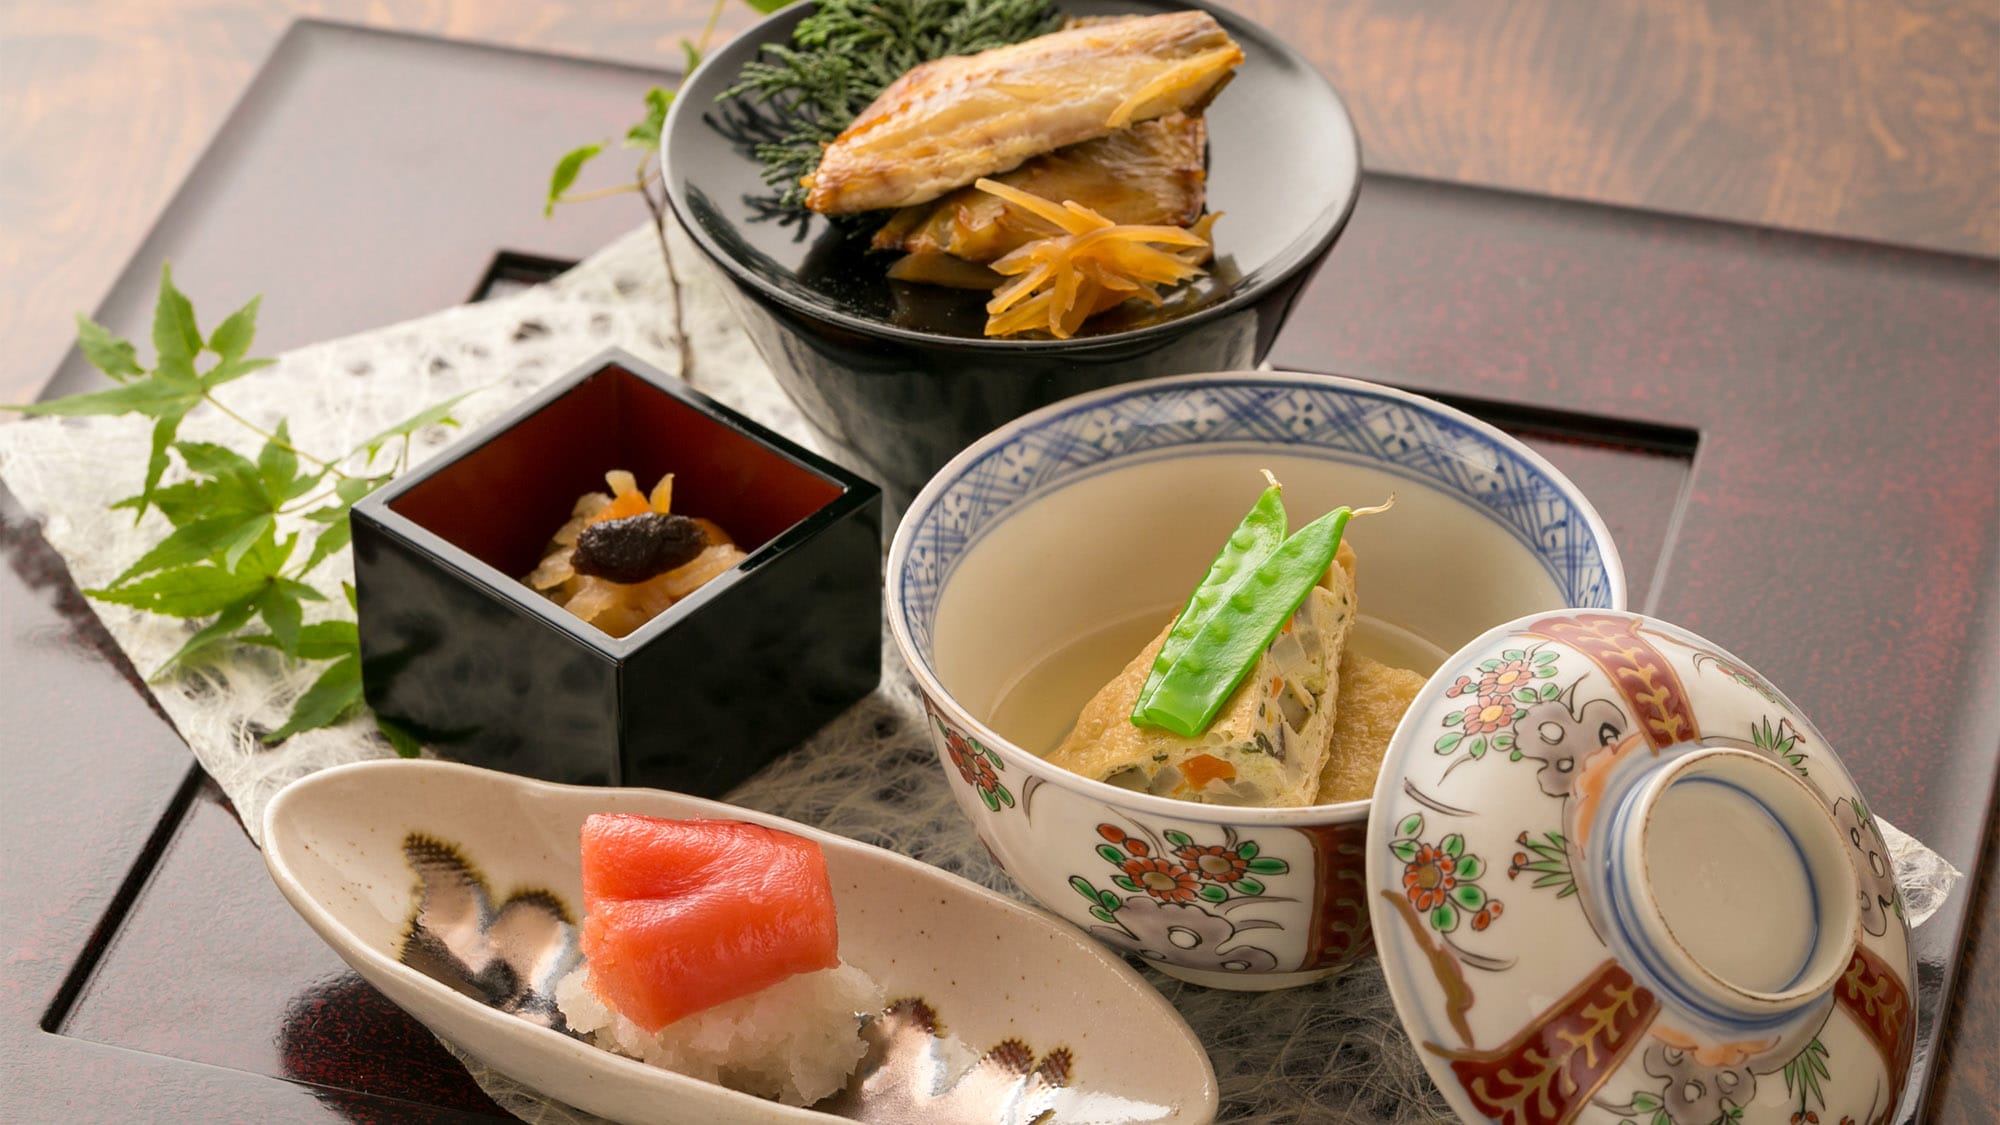 ・ Breakfast example: Consideration for nutritional balance such as grilled fish and simmered dishes